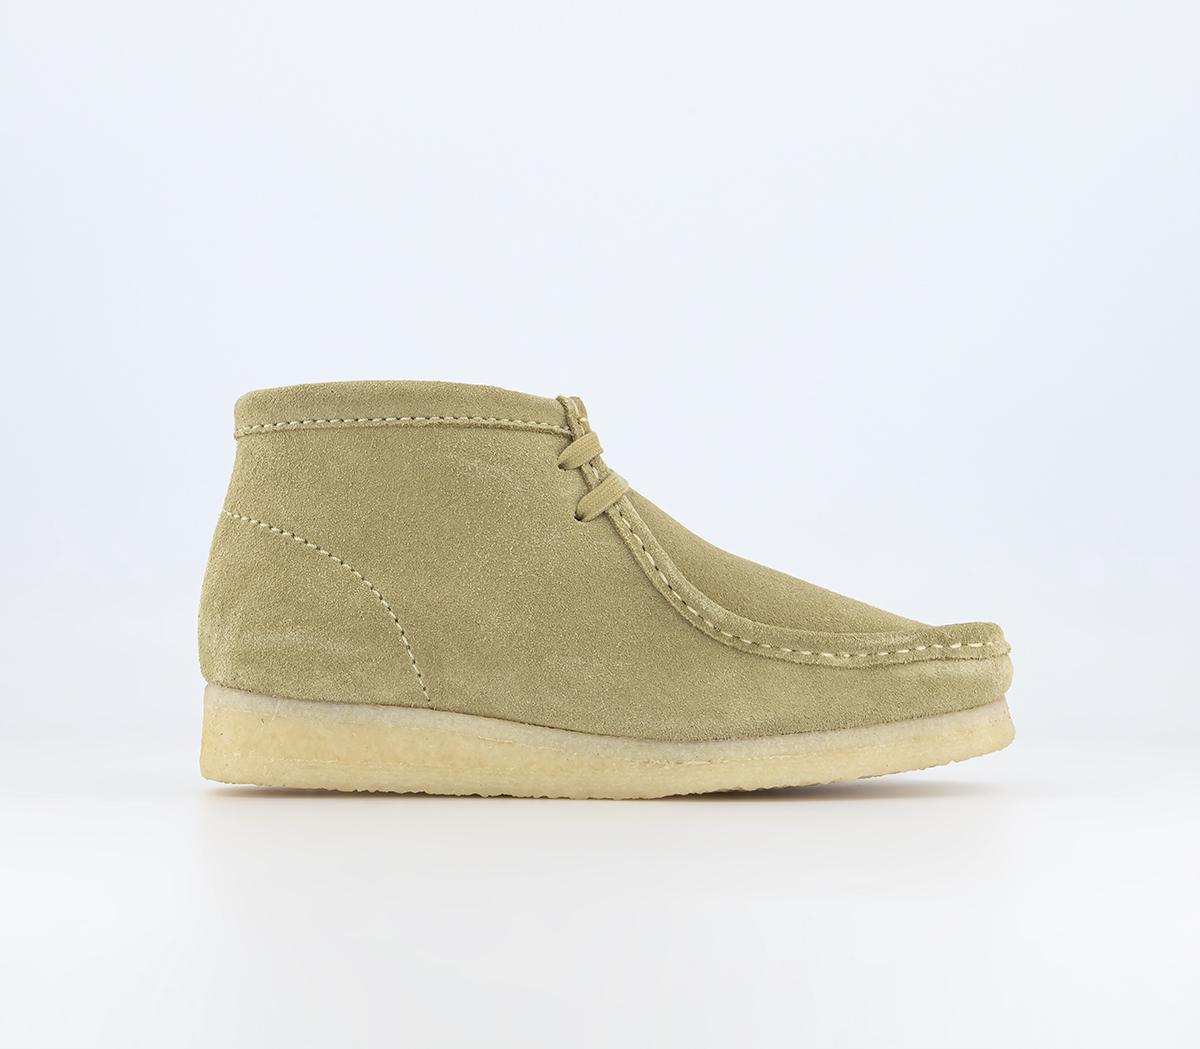 Clarks Originals Womens Wallabee Boot Maple Suede In Natural, 5